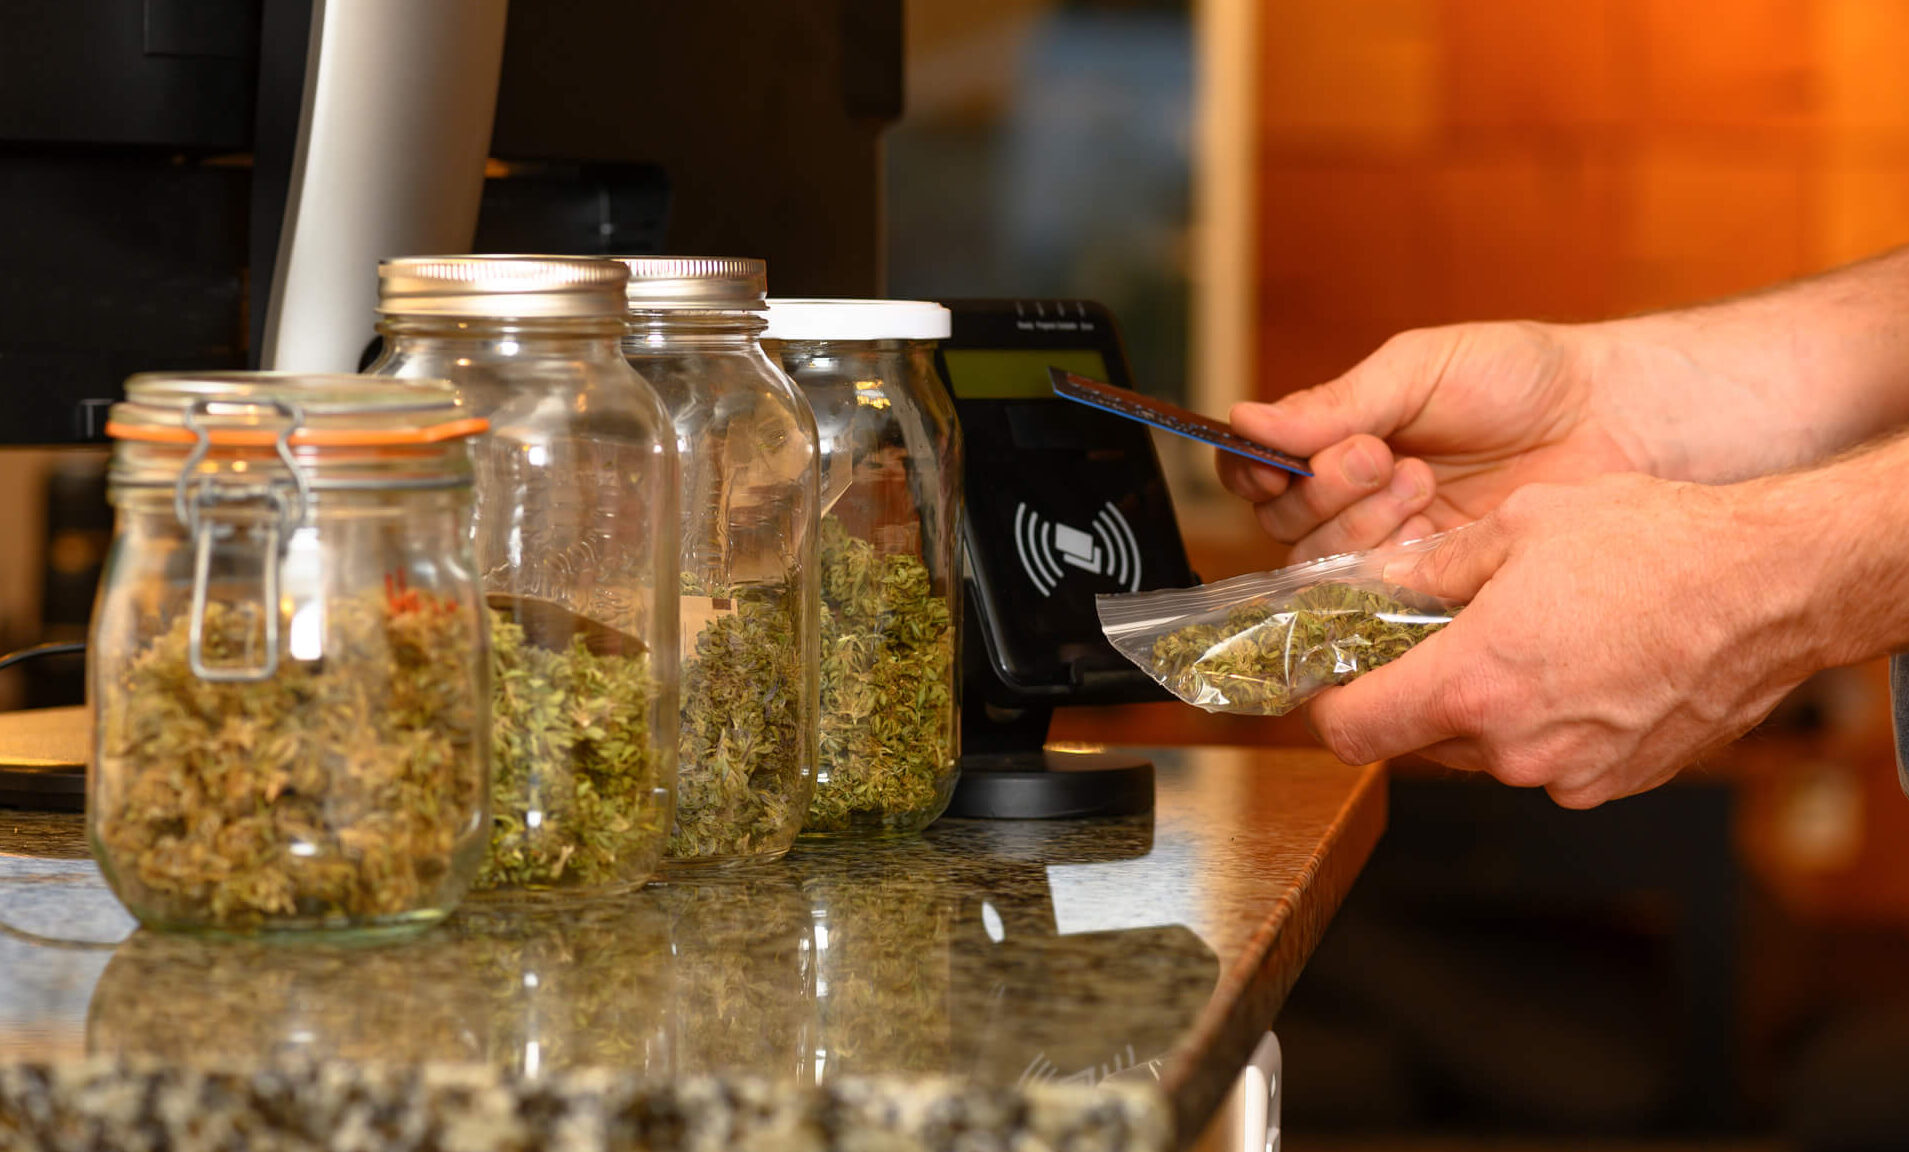 Jars of cannabis flower at a dispensary with a customer's hands using a credit card to purchase